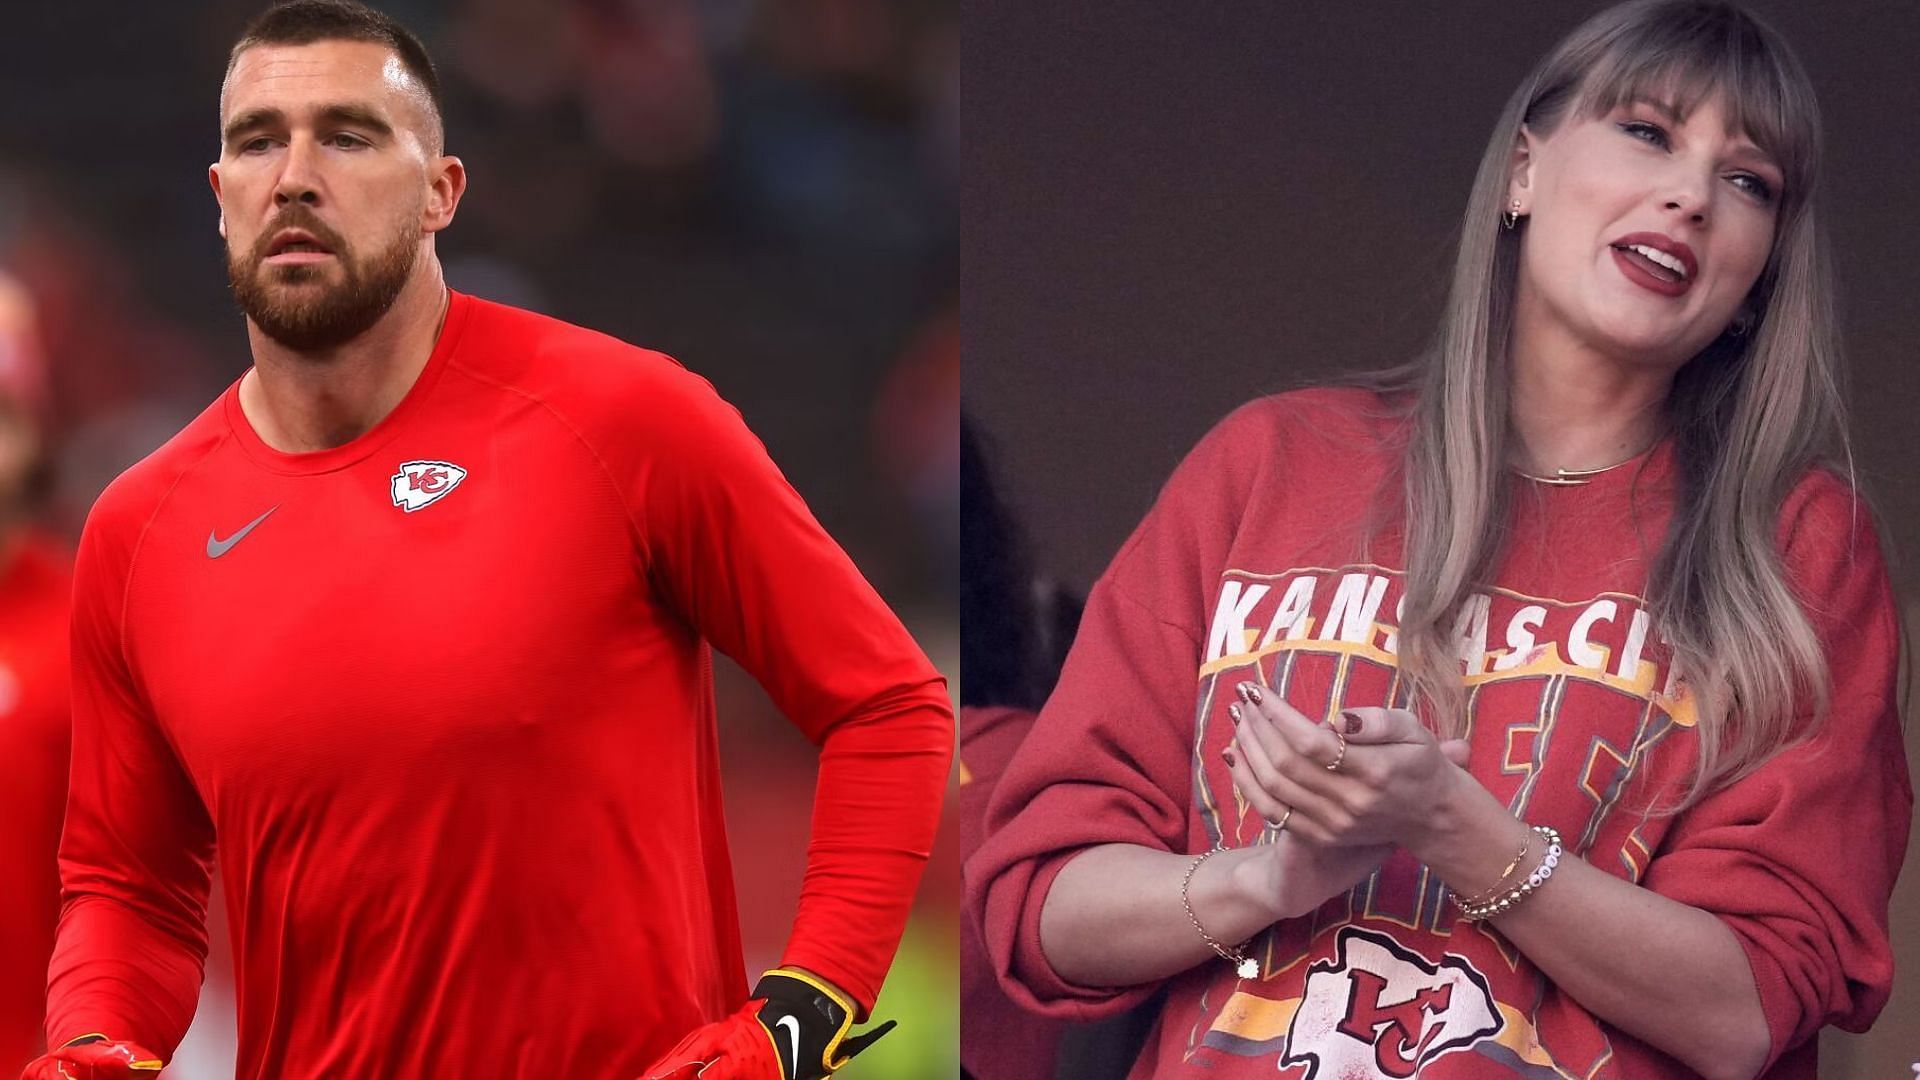 All-Pro tight end Travis Kelce and multi-awarded musician Taylor Swift